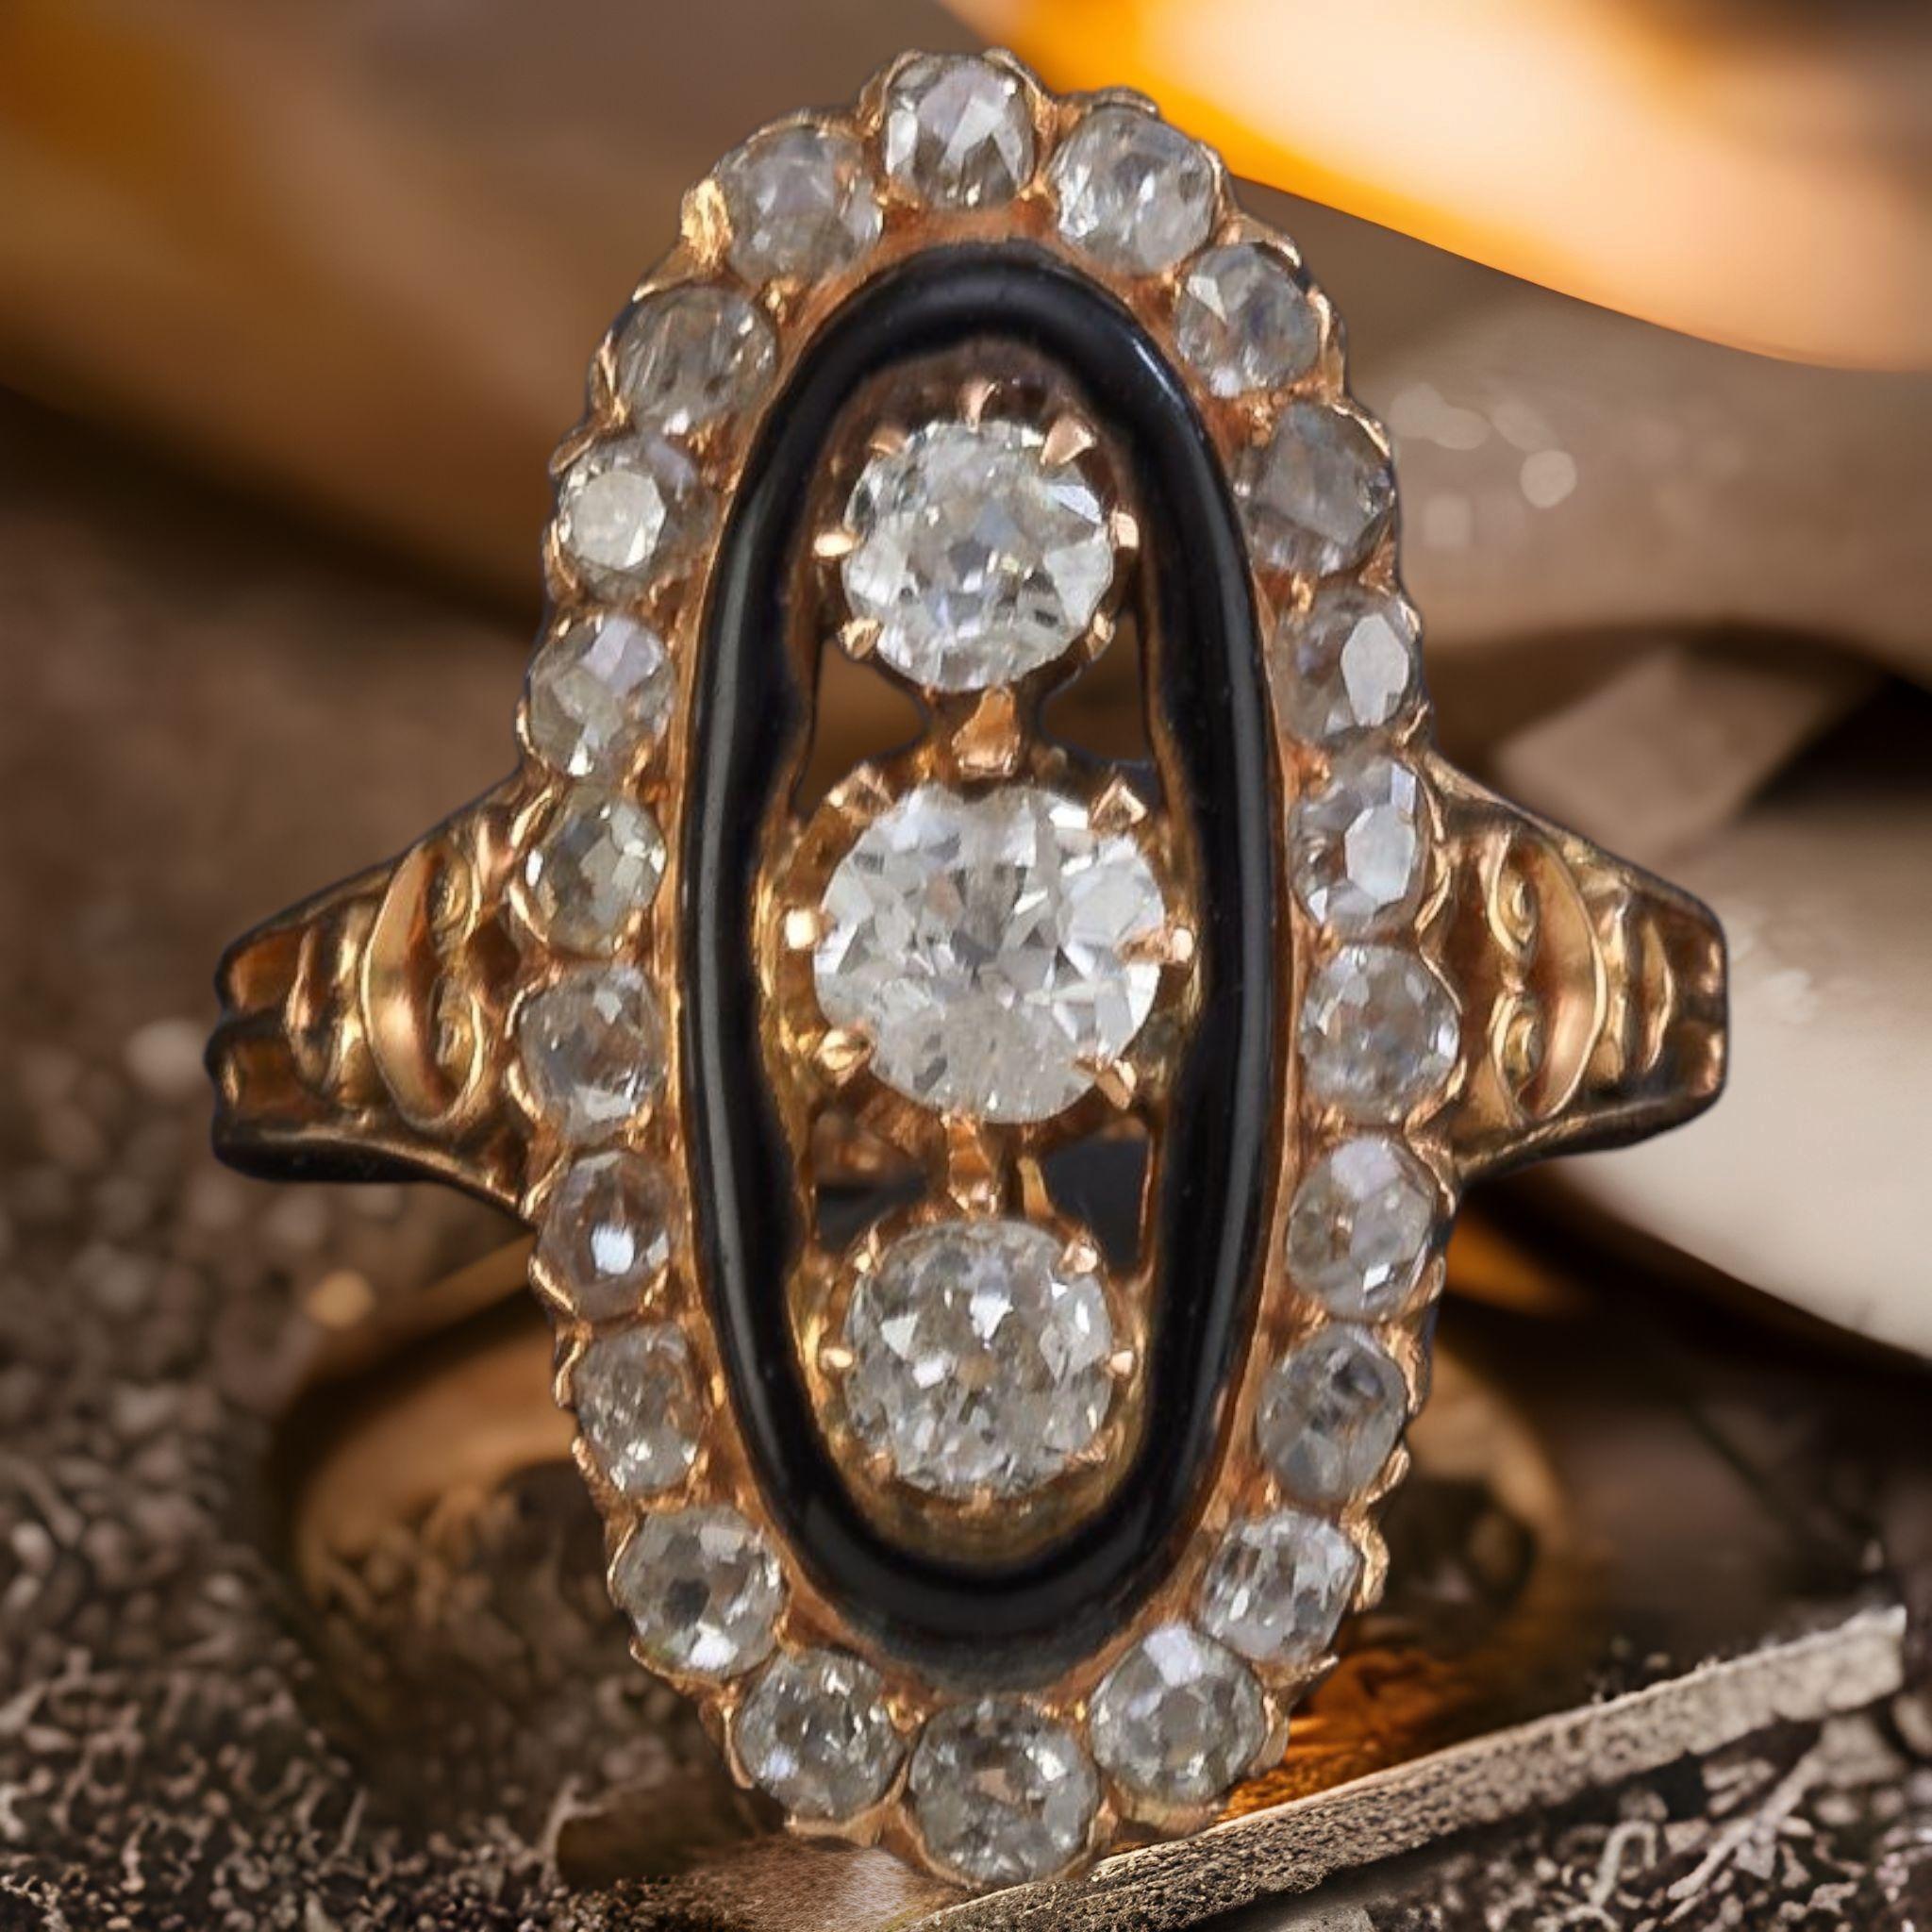 Navette shape is distinctive, sometimes referred as marquise shape. its proportions are pleasing to the eye and elongate the finger,
Centered vertically  within the Navette profile are three old  mine cut diamonds totaling approximately  1 carat